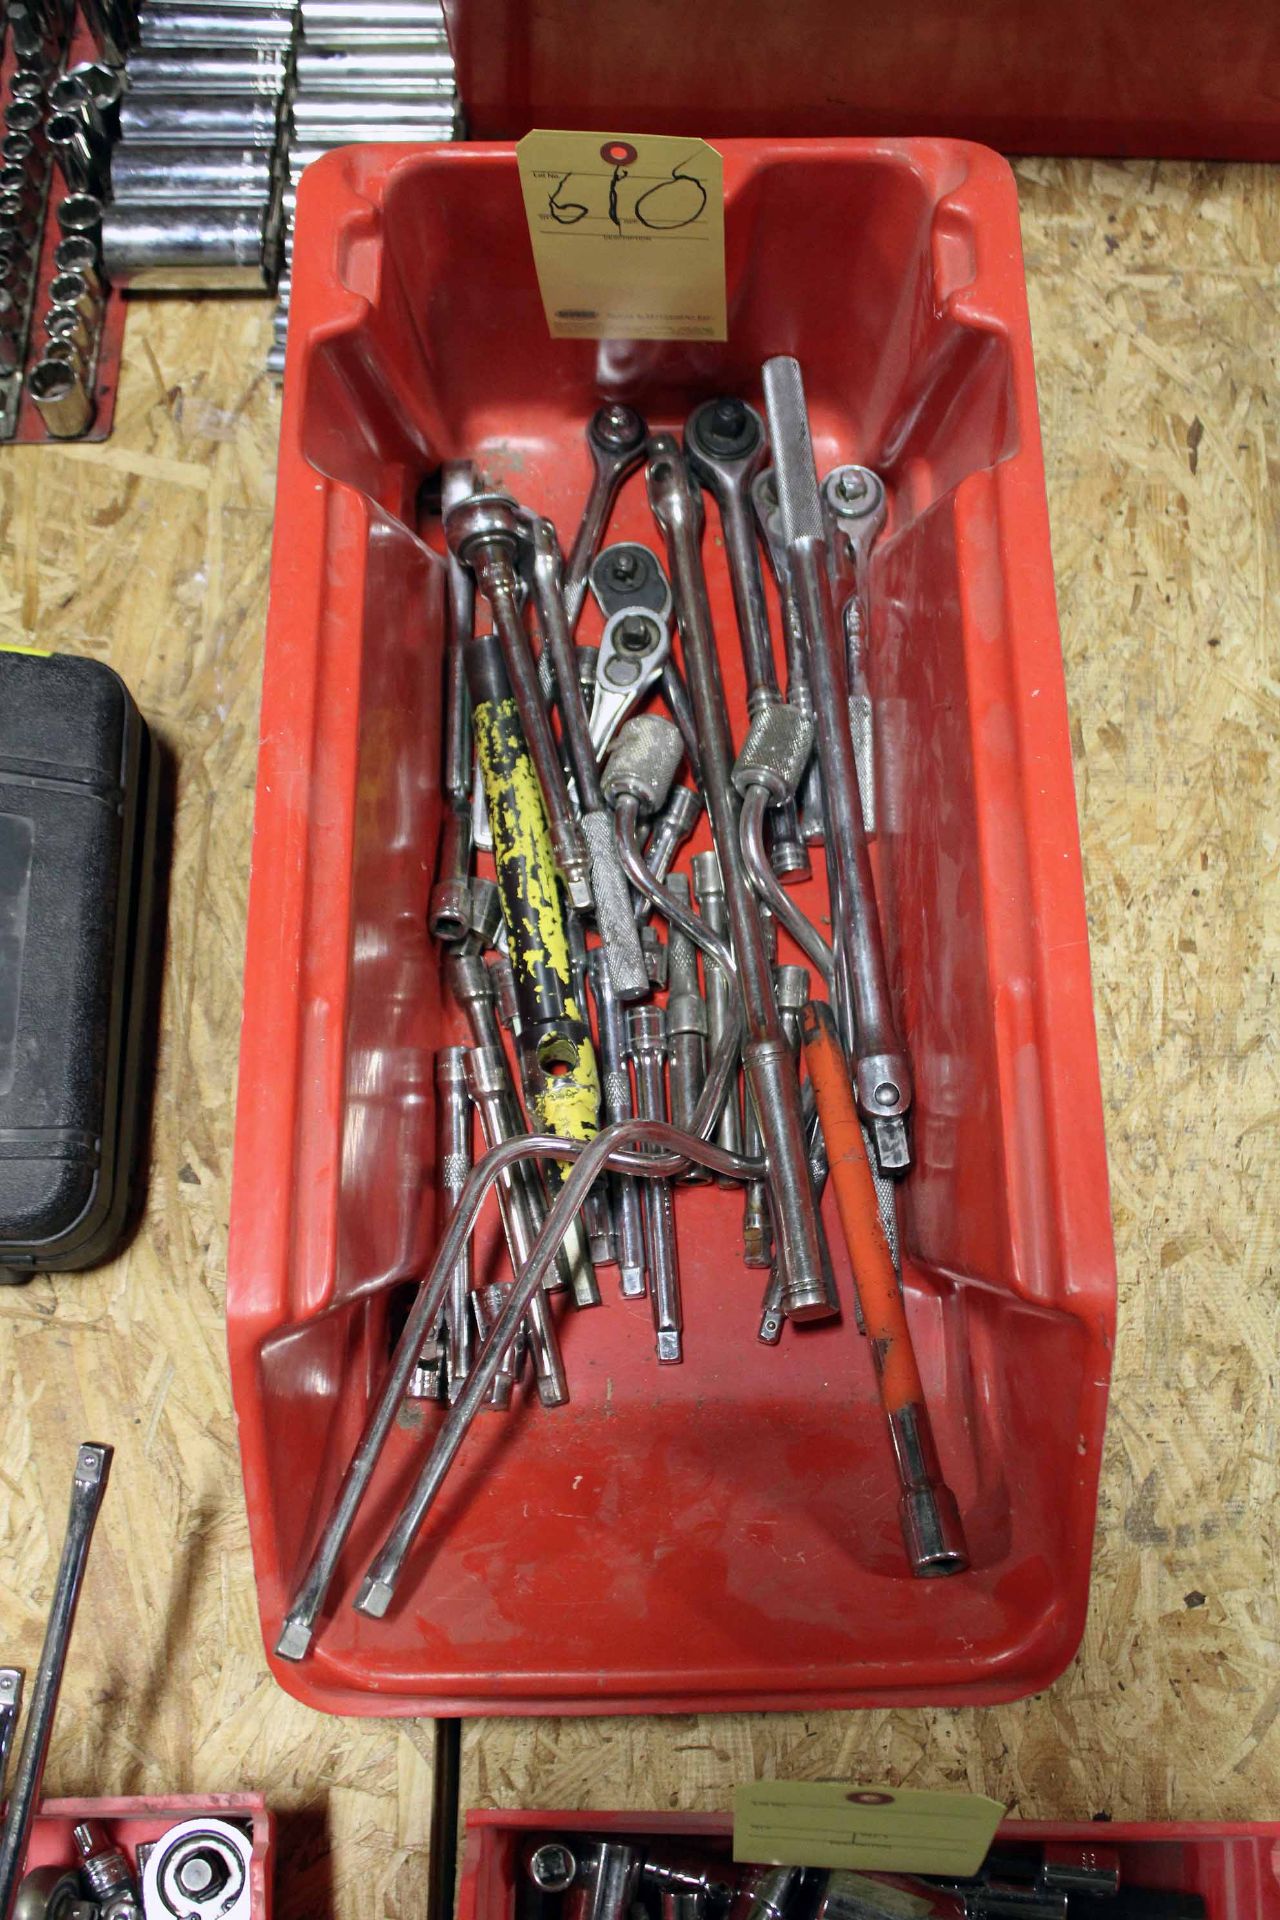 LOT CONSISTING OF: 1/2" & 3/8" drive ratchets, break over bars, extensions, etc.